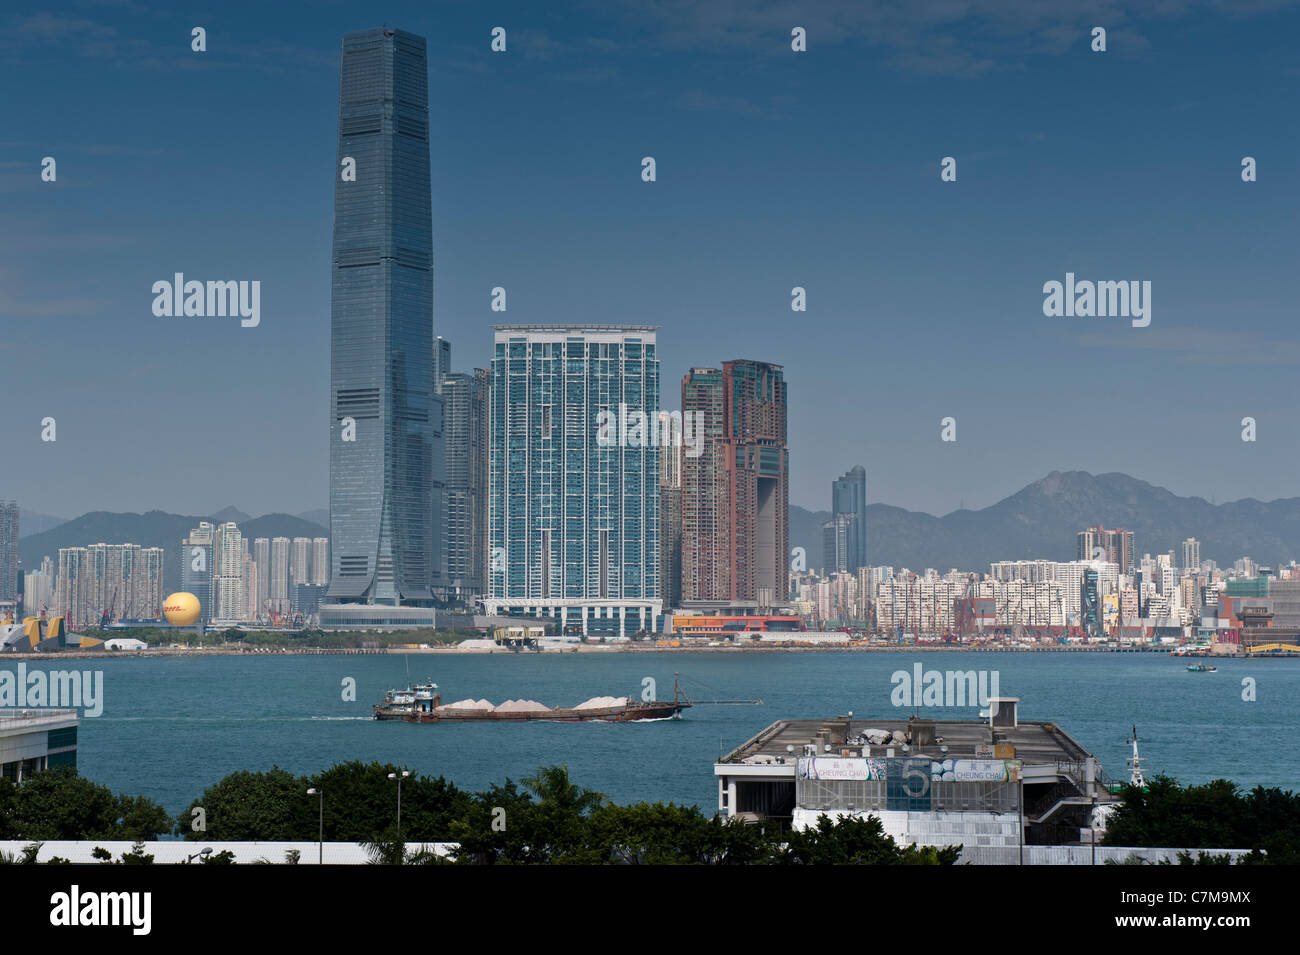 View on the Kowloon side from Hong Kong Island with the ICC, International Commerce Centre as the highest building. Stock Photo